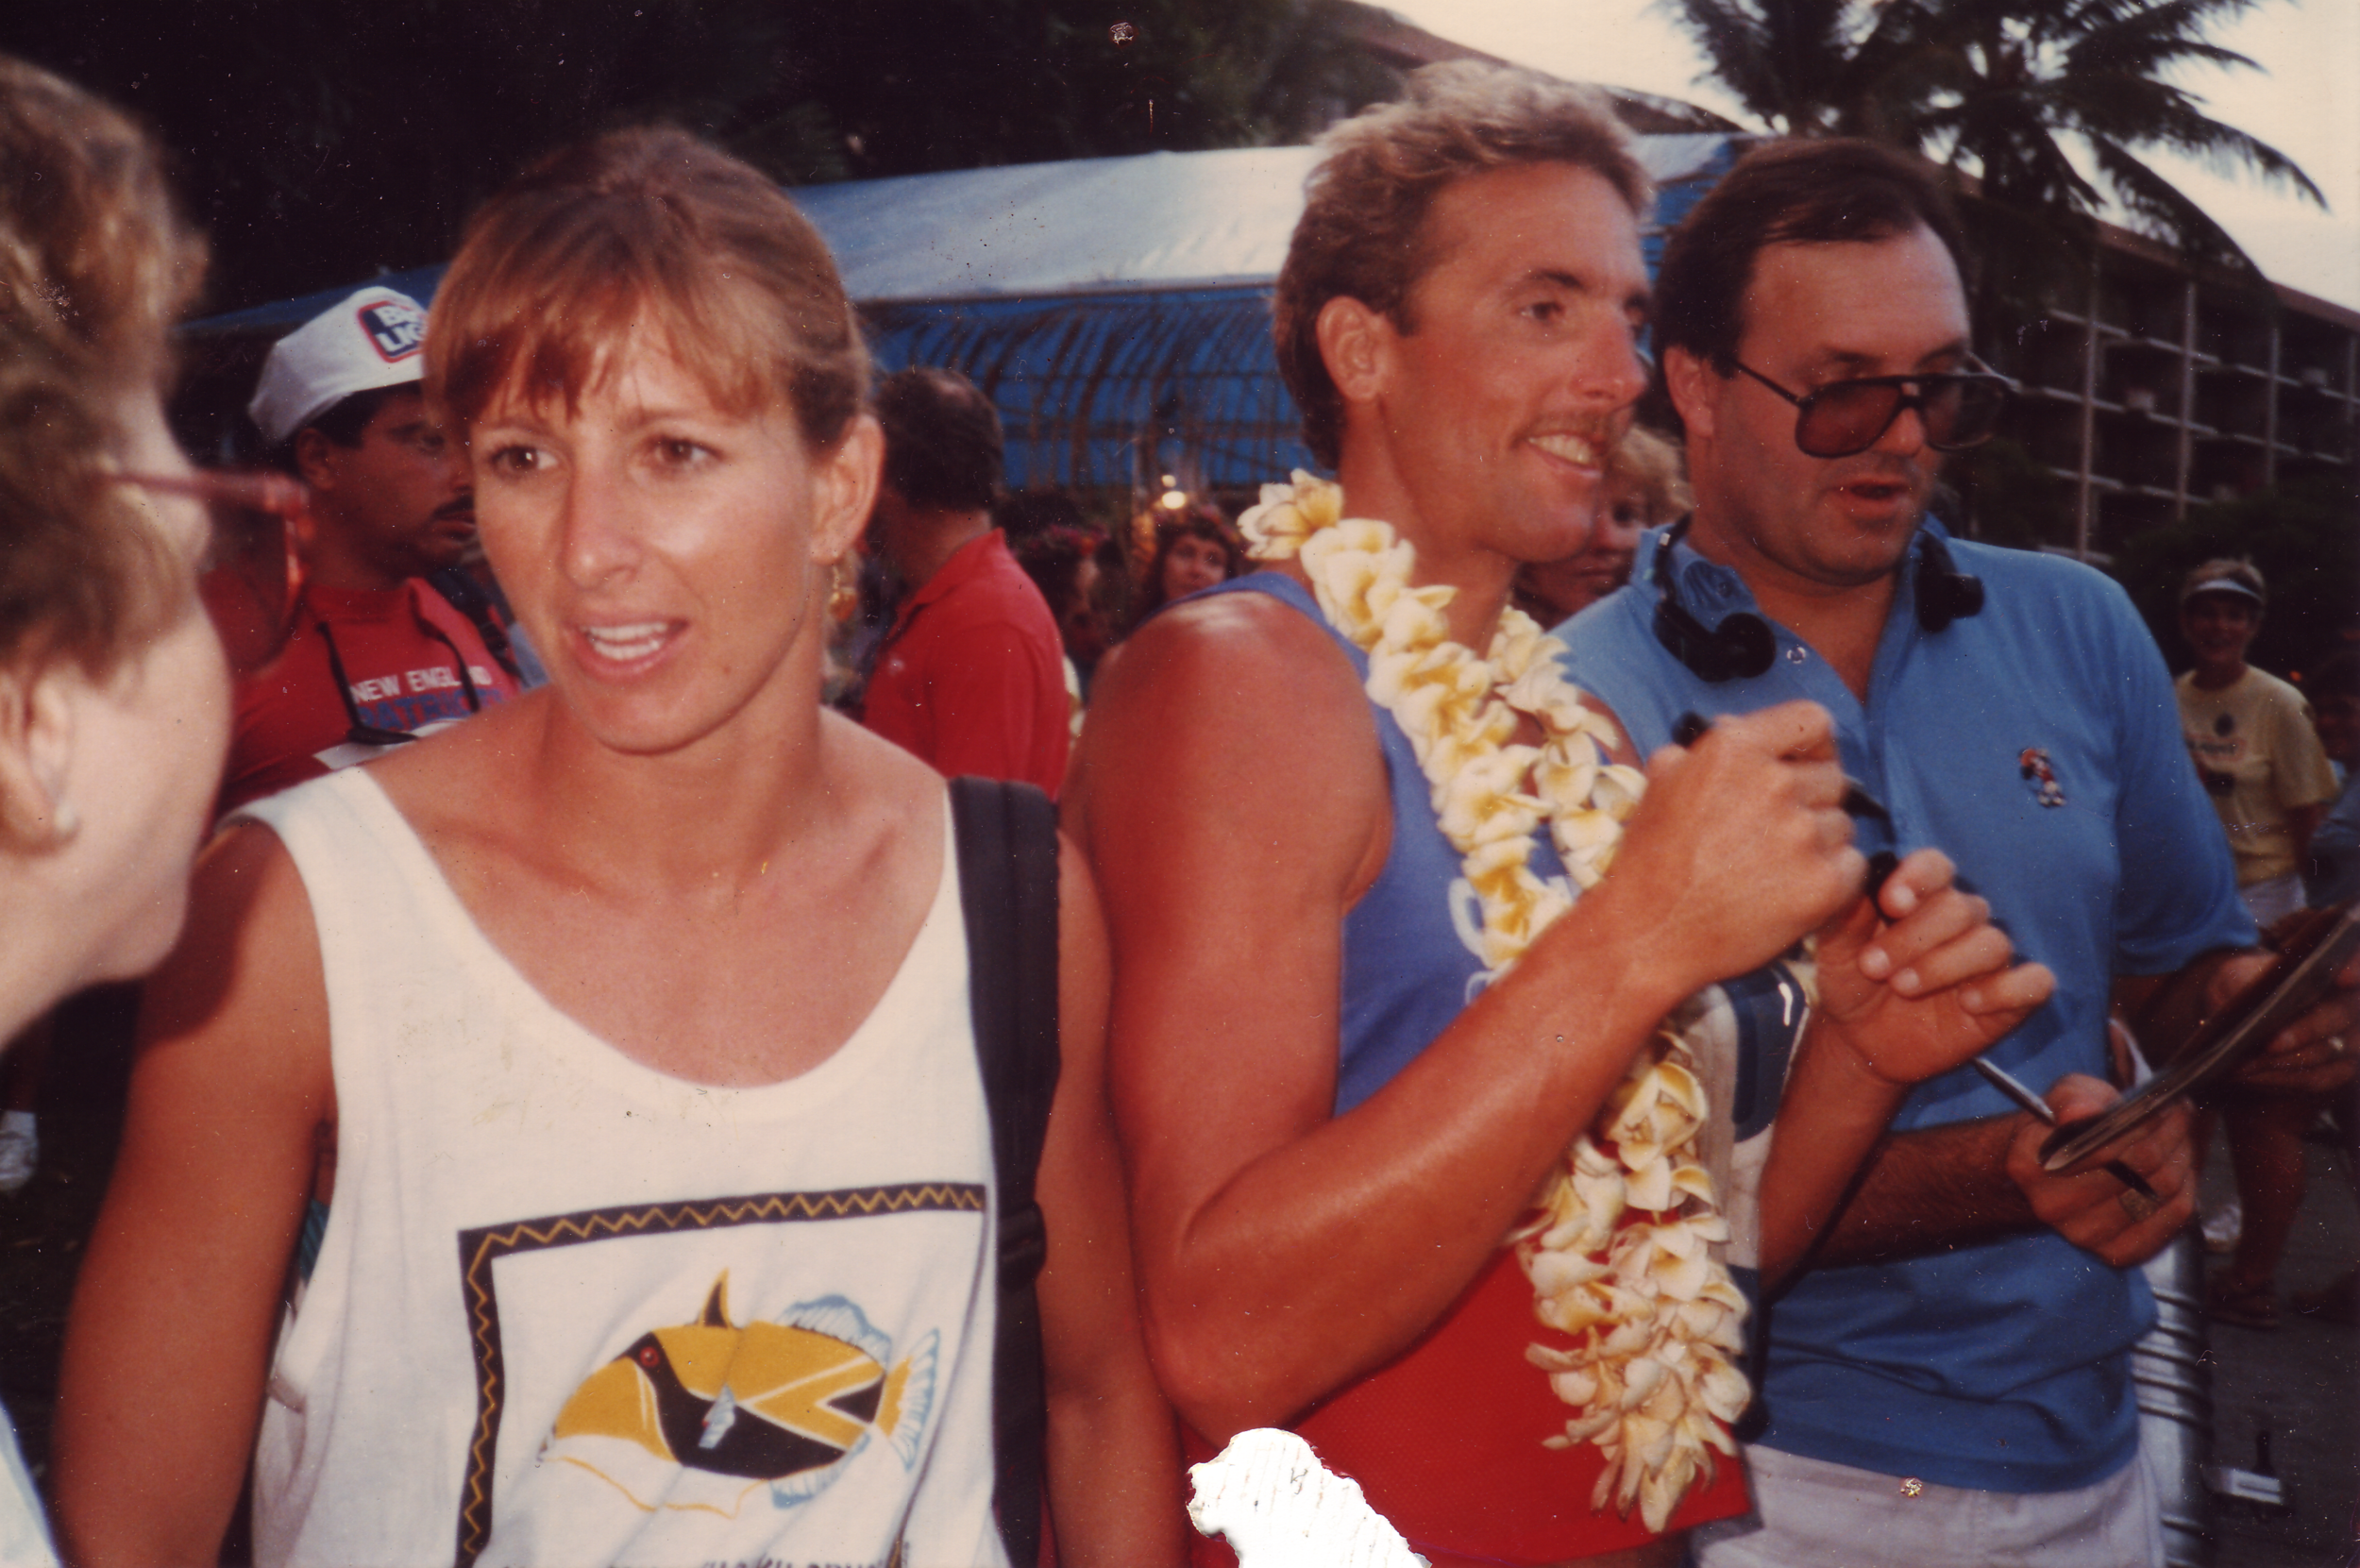  Six-time Ironman world champion Dave Scott and his wife at the finish of the 1985 Ironman. 